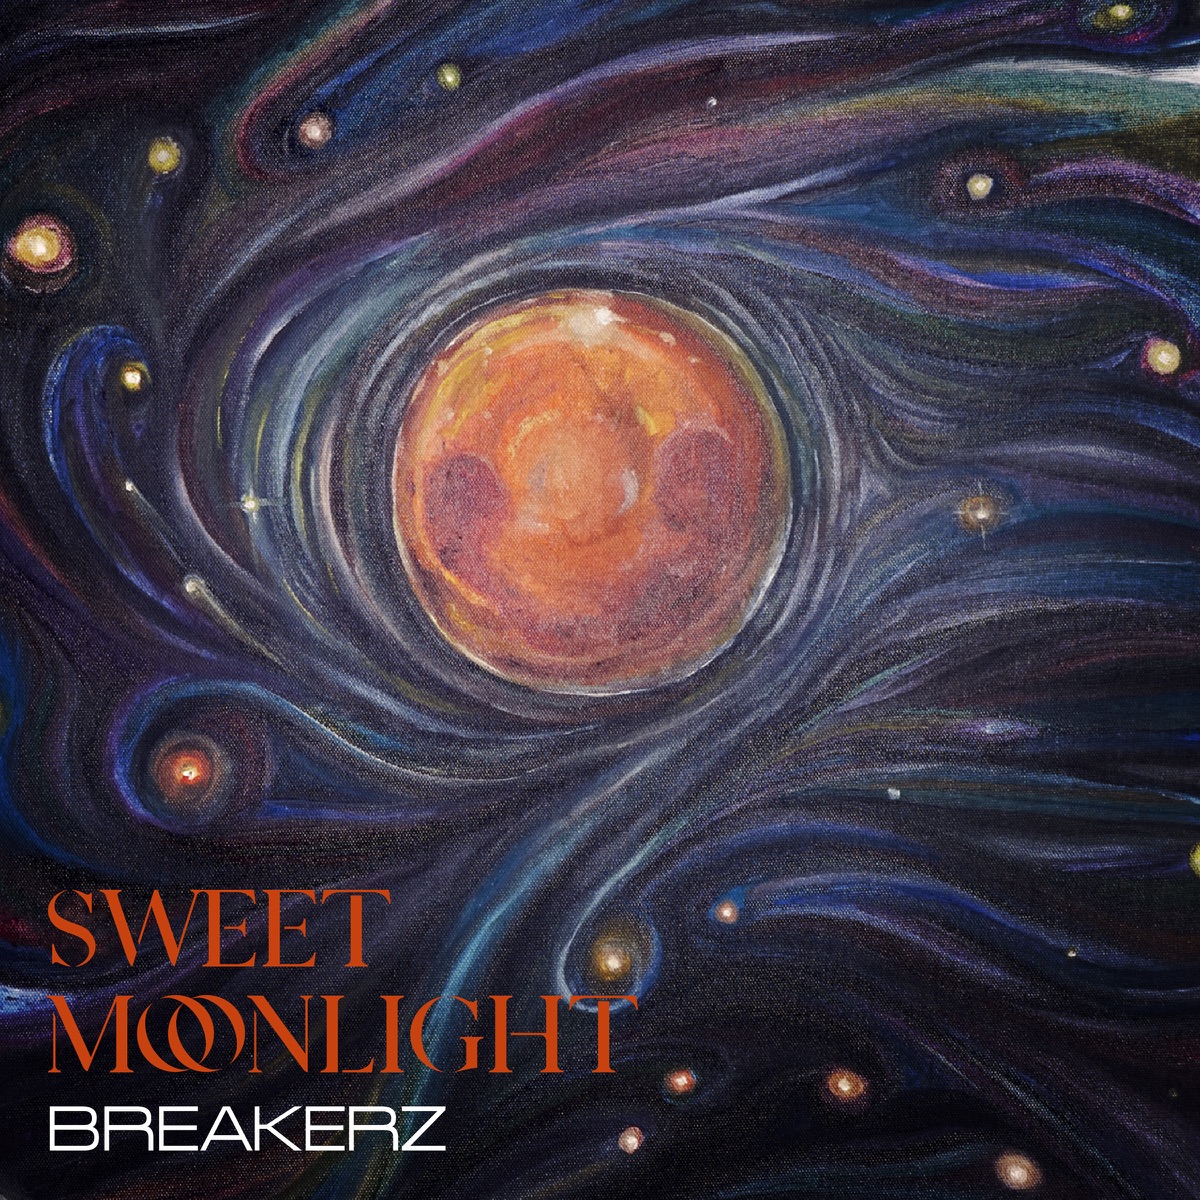 Cover for『BREAKERZ - SWEET MOONLIGHT』from the release『SWEET MOONLIGHT』